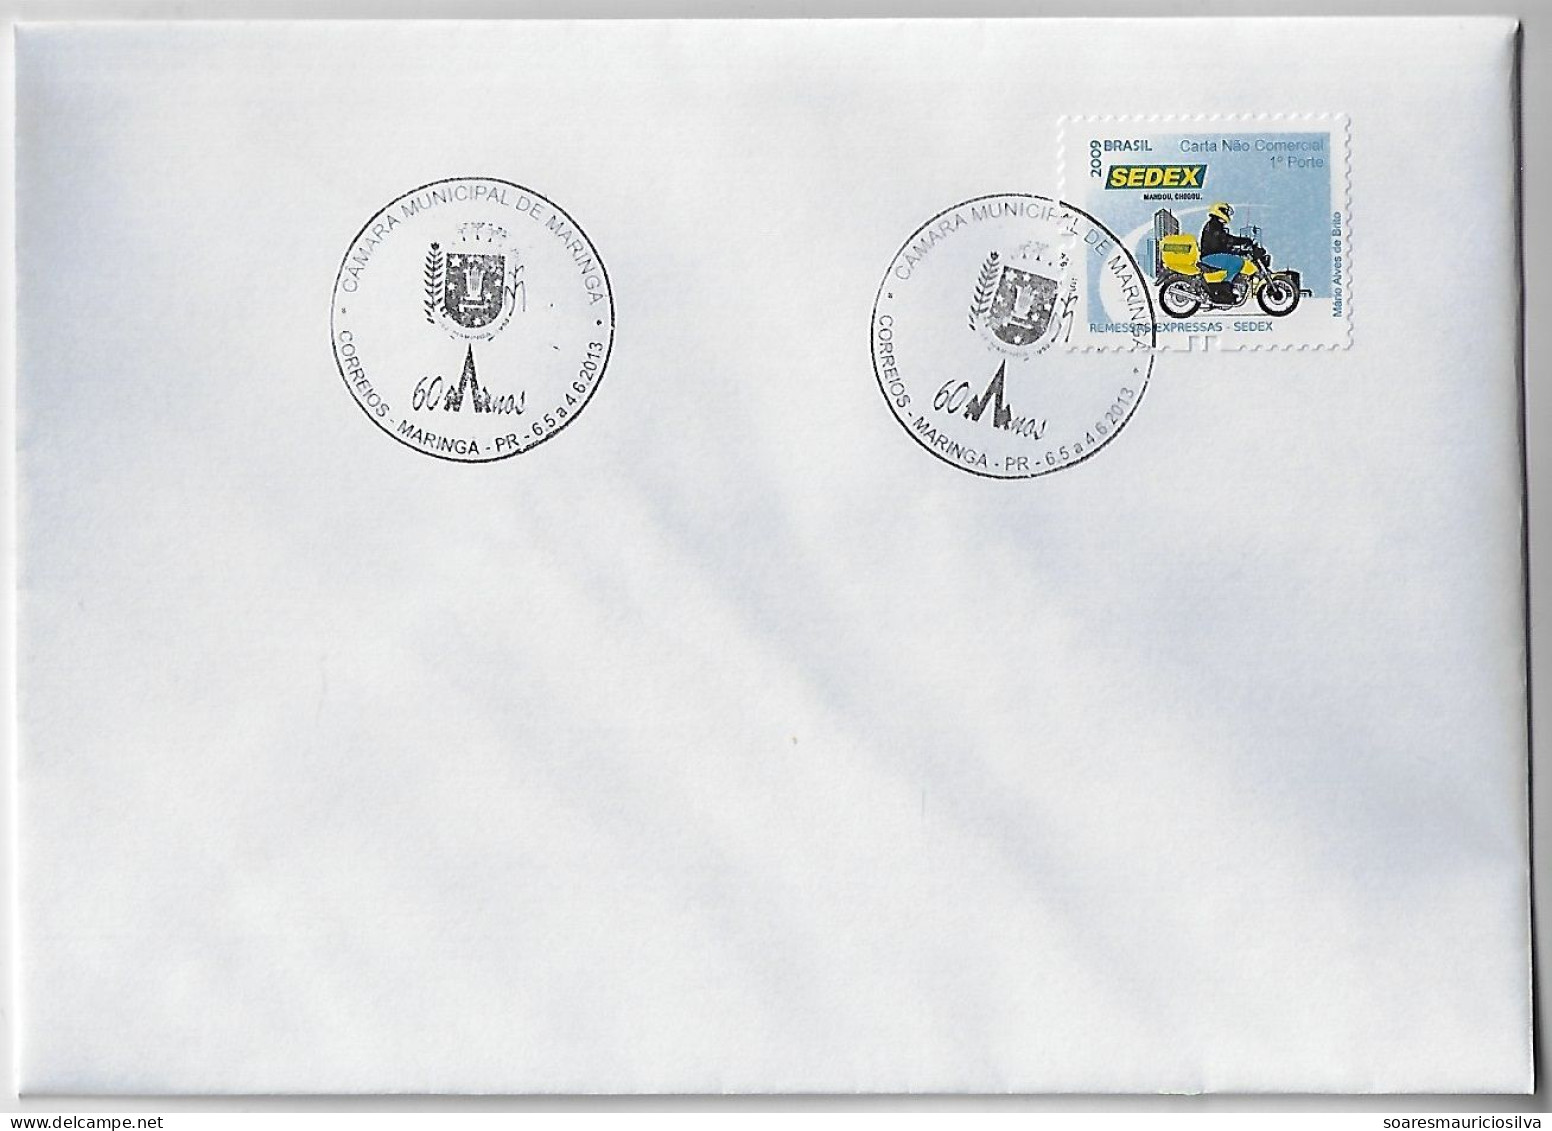 Brazil 2013 Cover With Commemorative Cancel 60 Years Of Maringá City Council Coat Of Arms - Cartas & Documentos